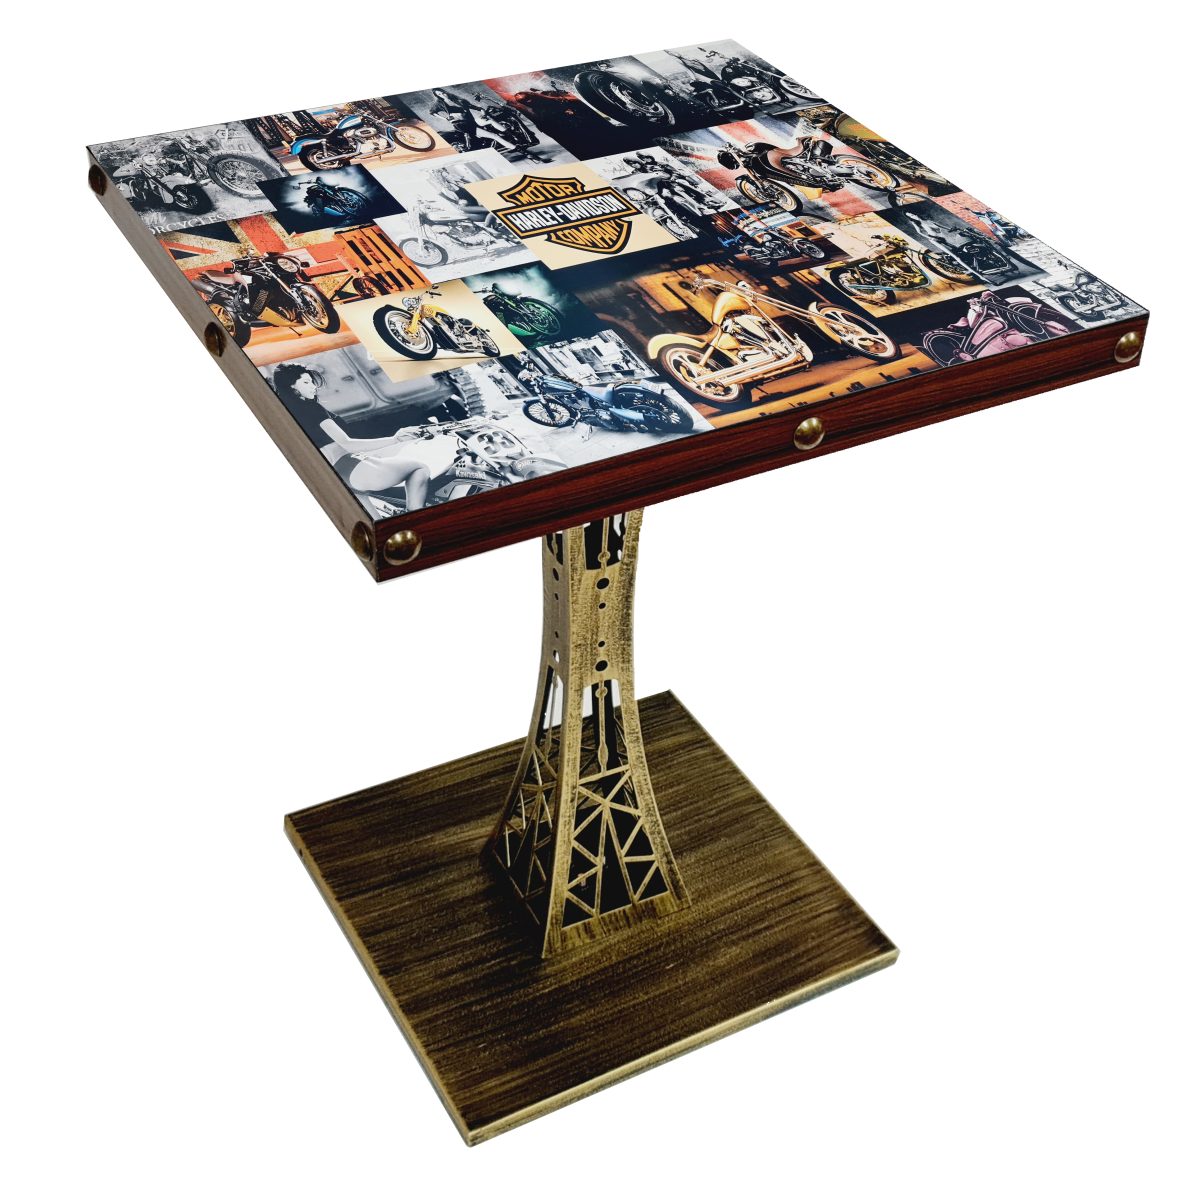 Custom Printed Tables Best Choice For Bars and Nightclubs